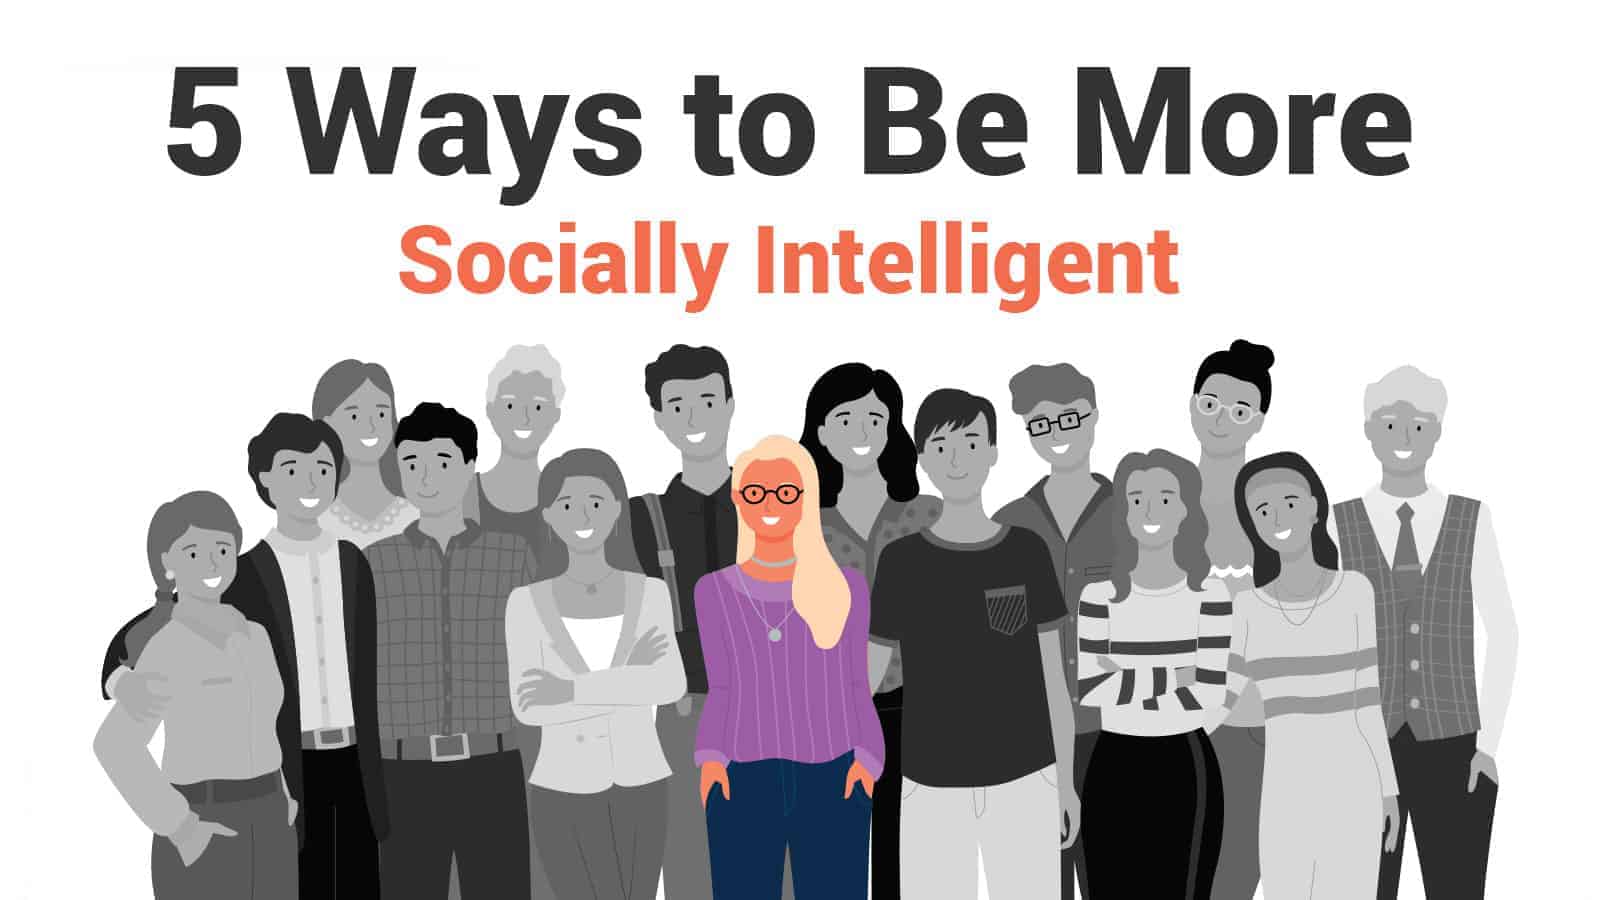 5 Ways to Be More Socially Intelligent